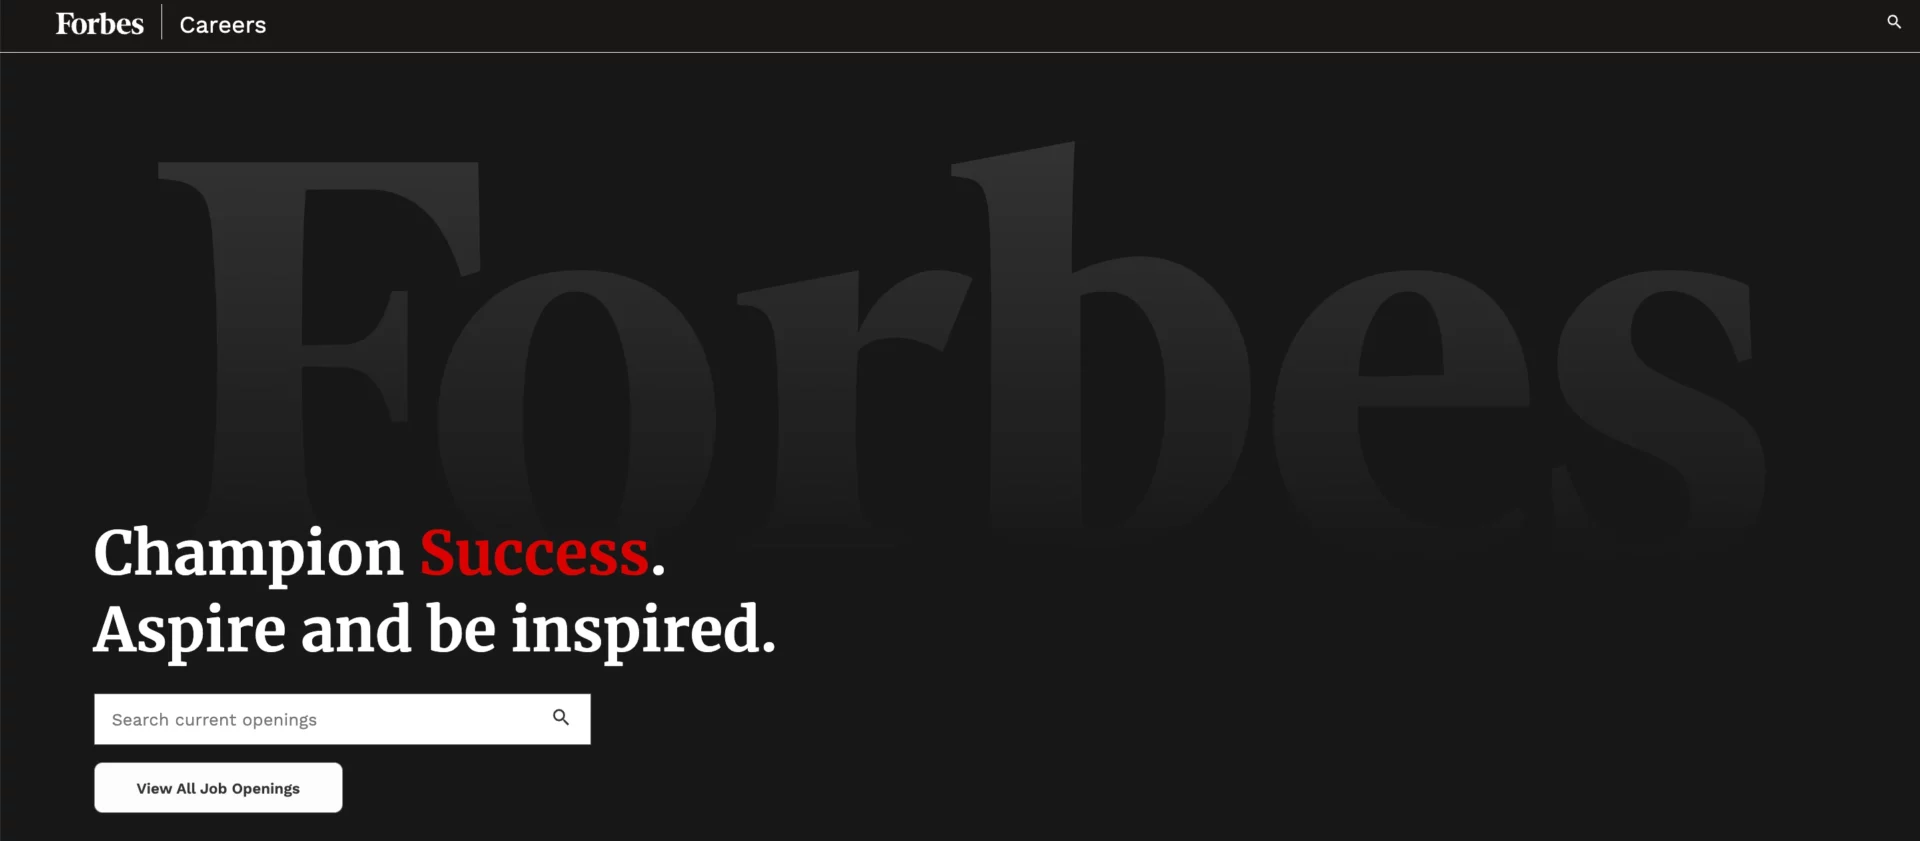 Get with us to the peak – a promise ingrained in Forbes quasi-headline (career landing page by Forbes)